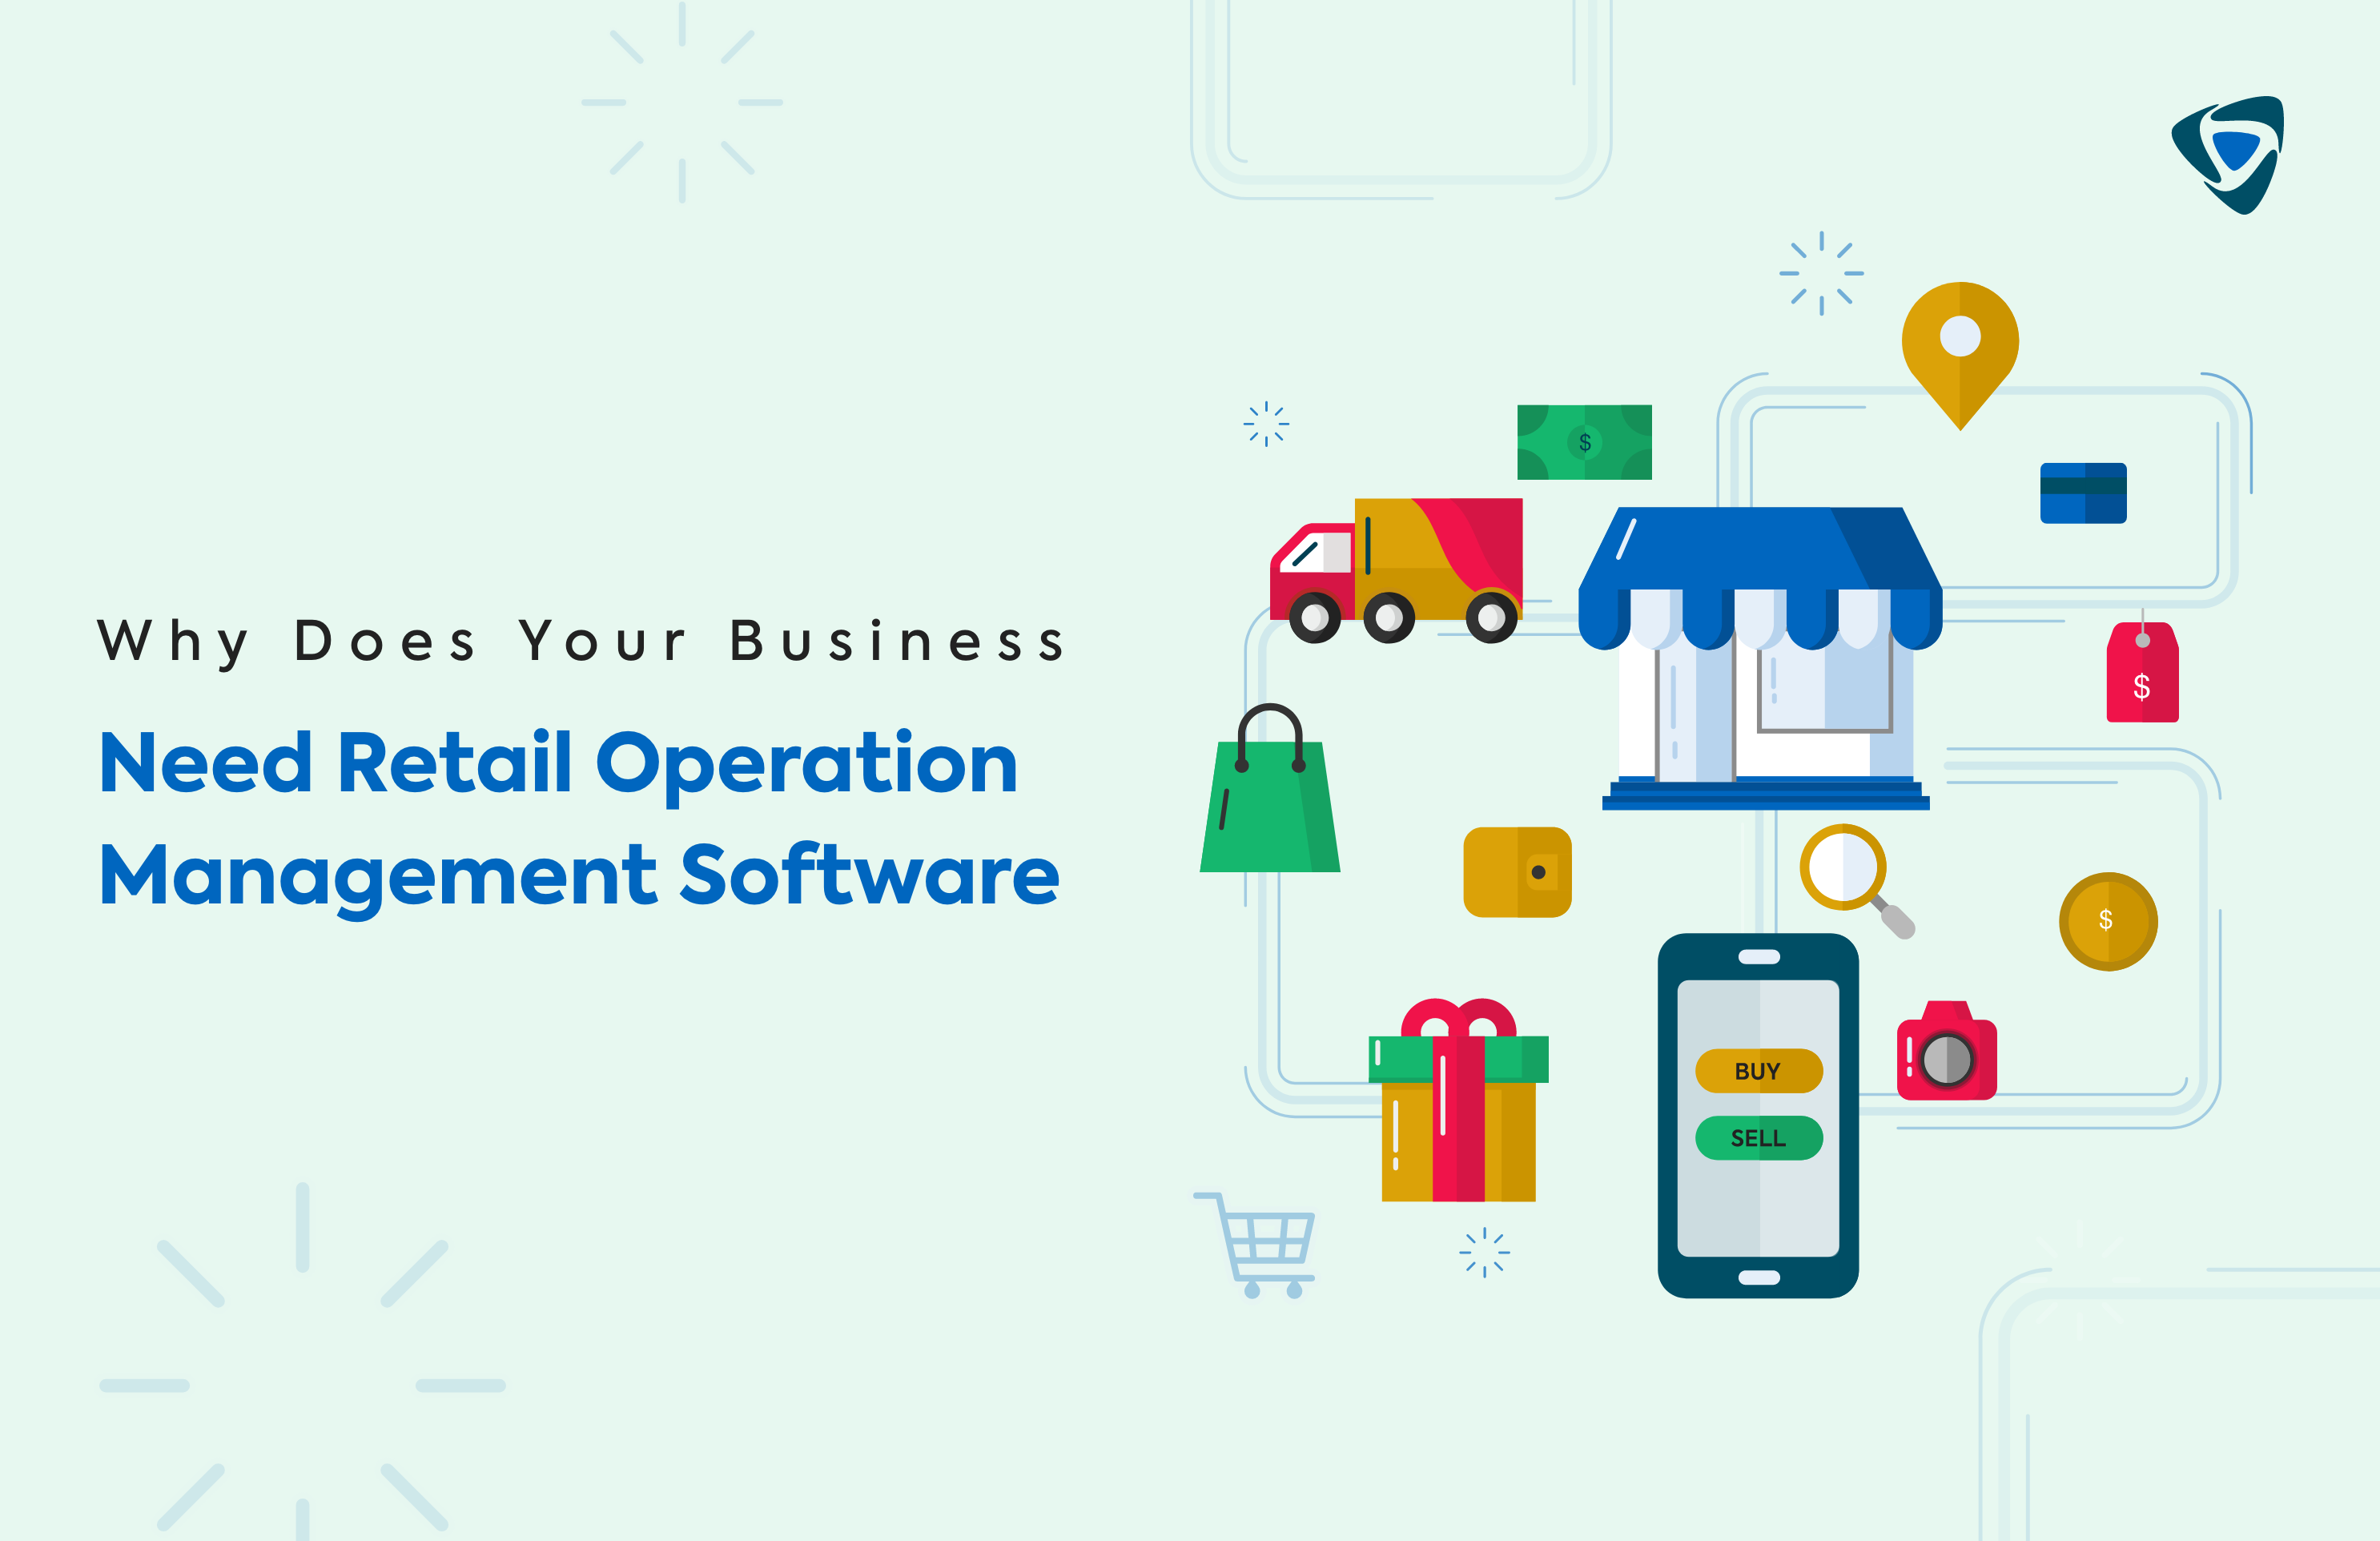 Why Does Your Business Need Retail Operation Management Software